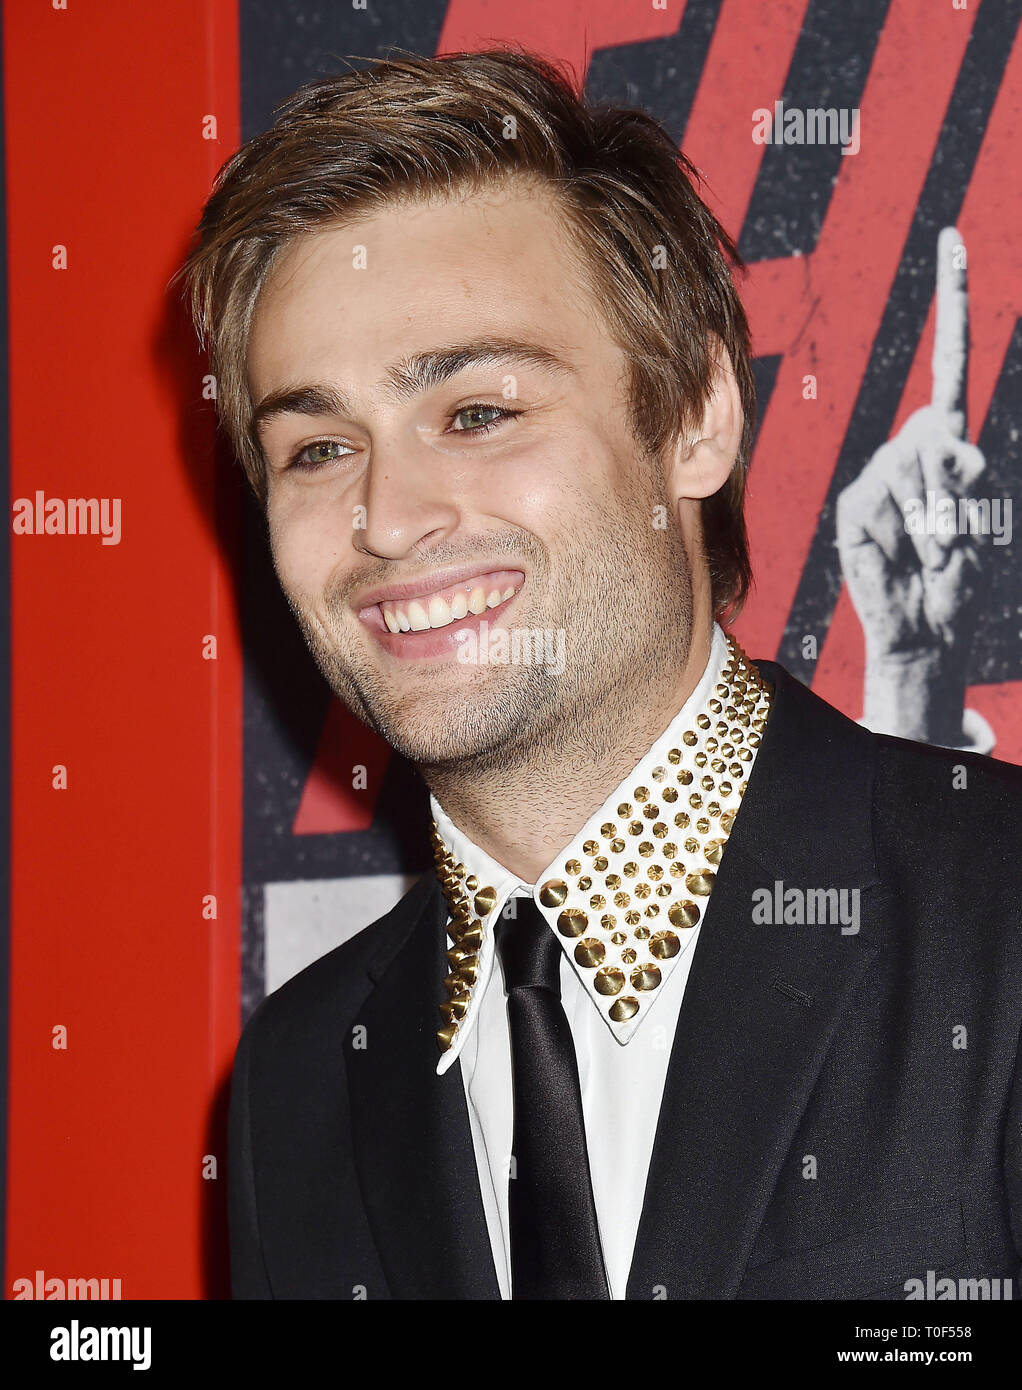 HOLLYWOOD, CA - MARCH 18: Douglas Booth arrives at the Premiere Of Netflix's 'The Dirt' at ArcLight Hollywood on March 18, 2019 in Hollywood, California. Stock Photo